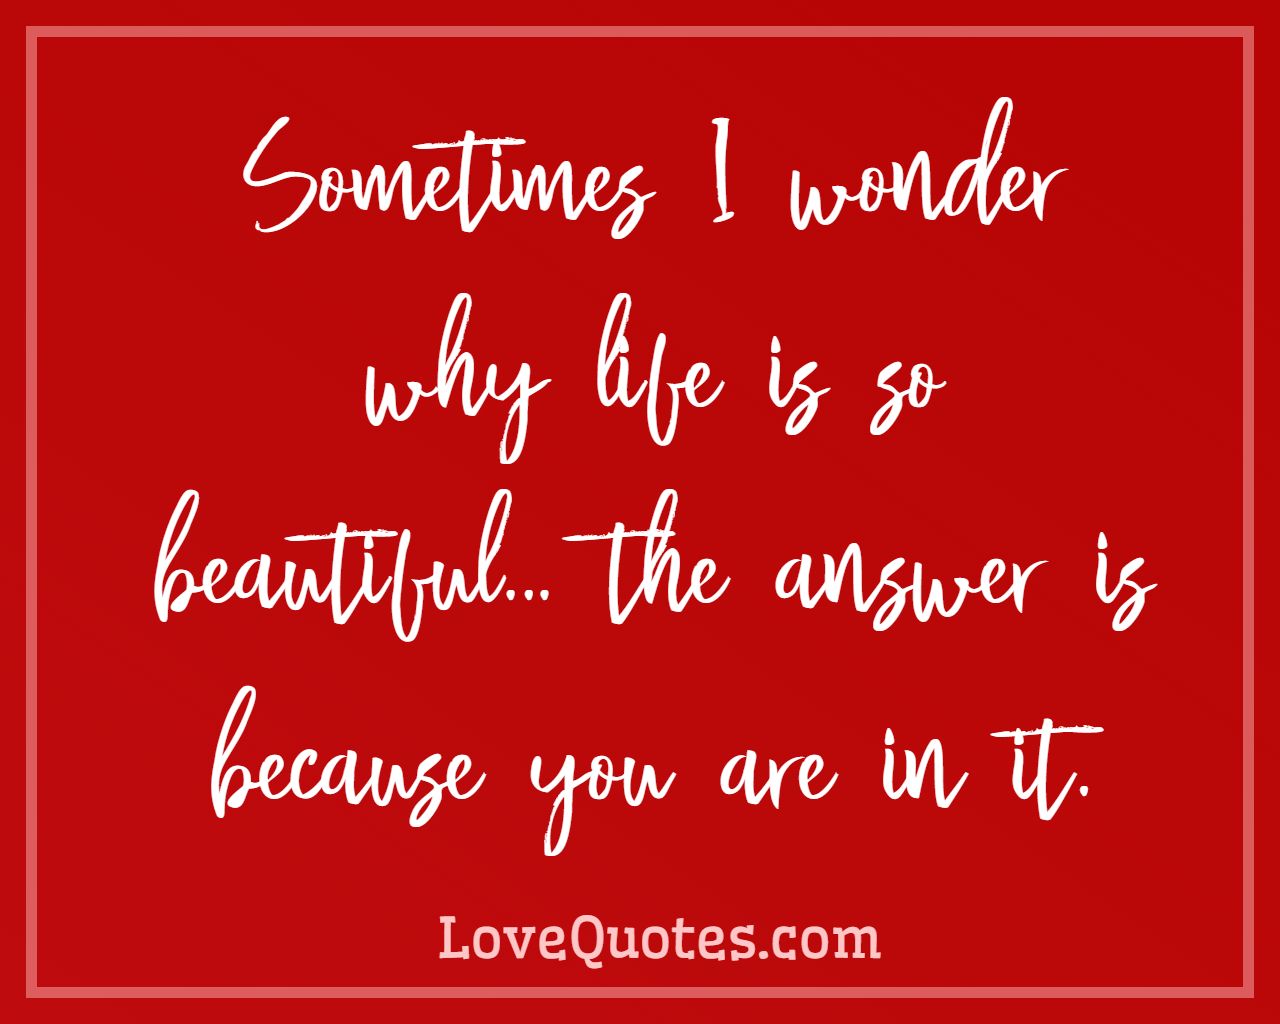 Life Is So Beautiful - Love Quotes